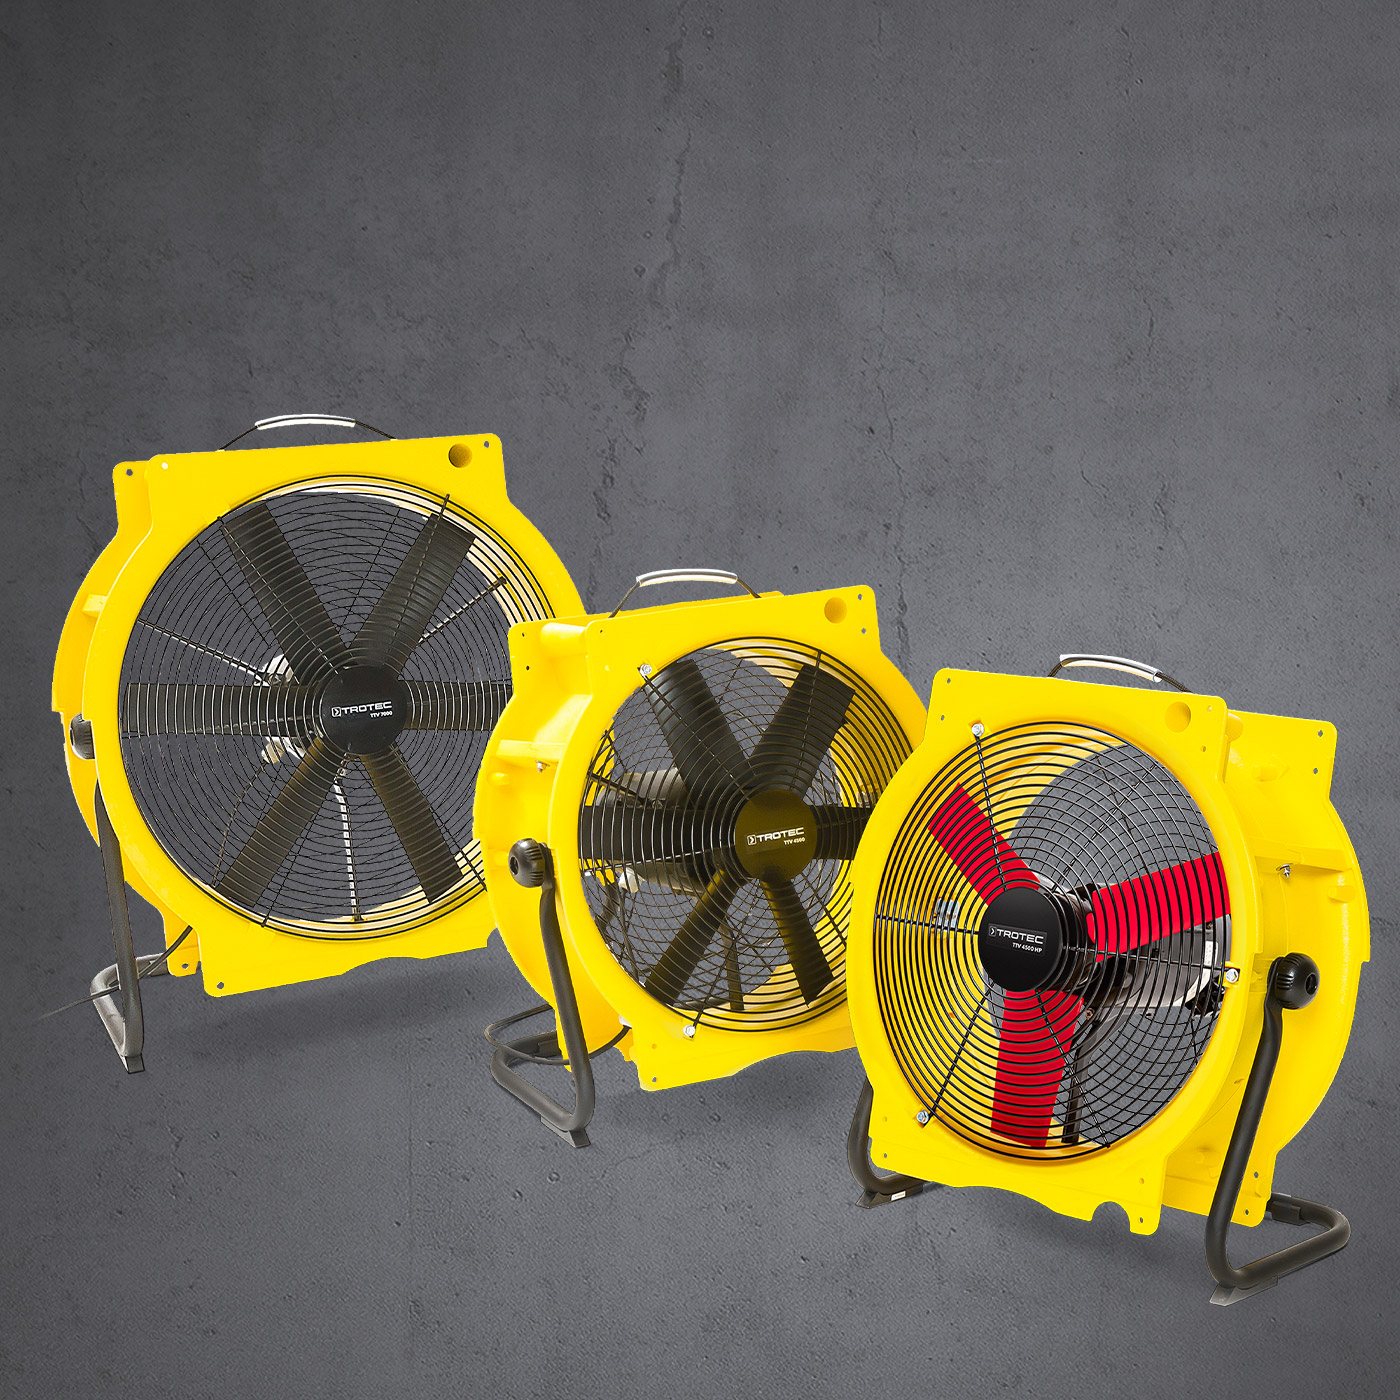 Axial fans of the TTV series